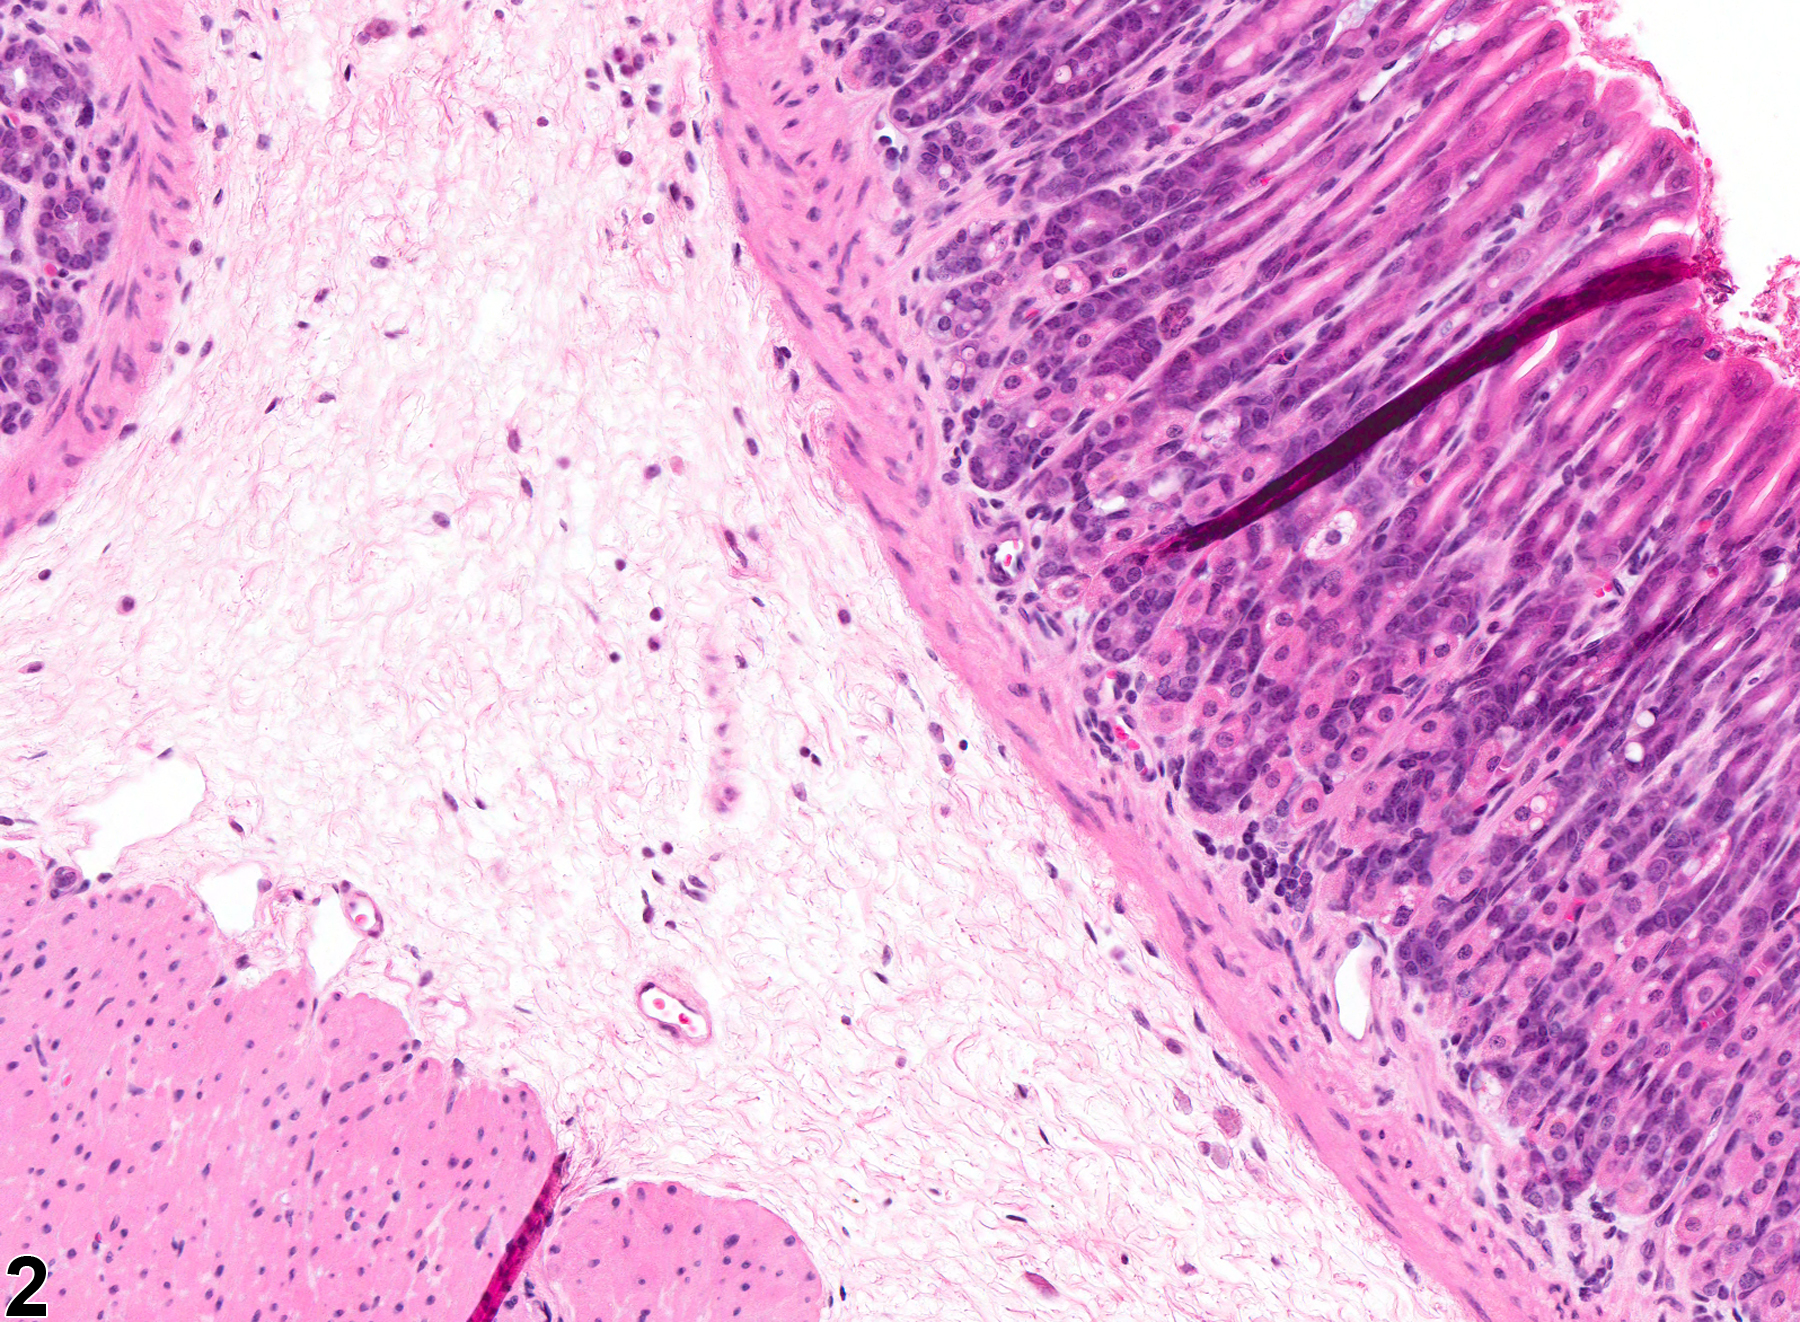 Image of edema in the glandular stomach from a female B6C3F1 mouse in a chronic study